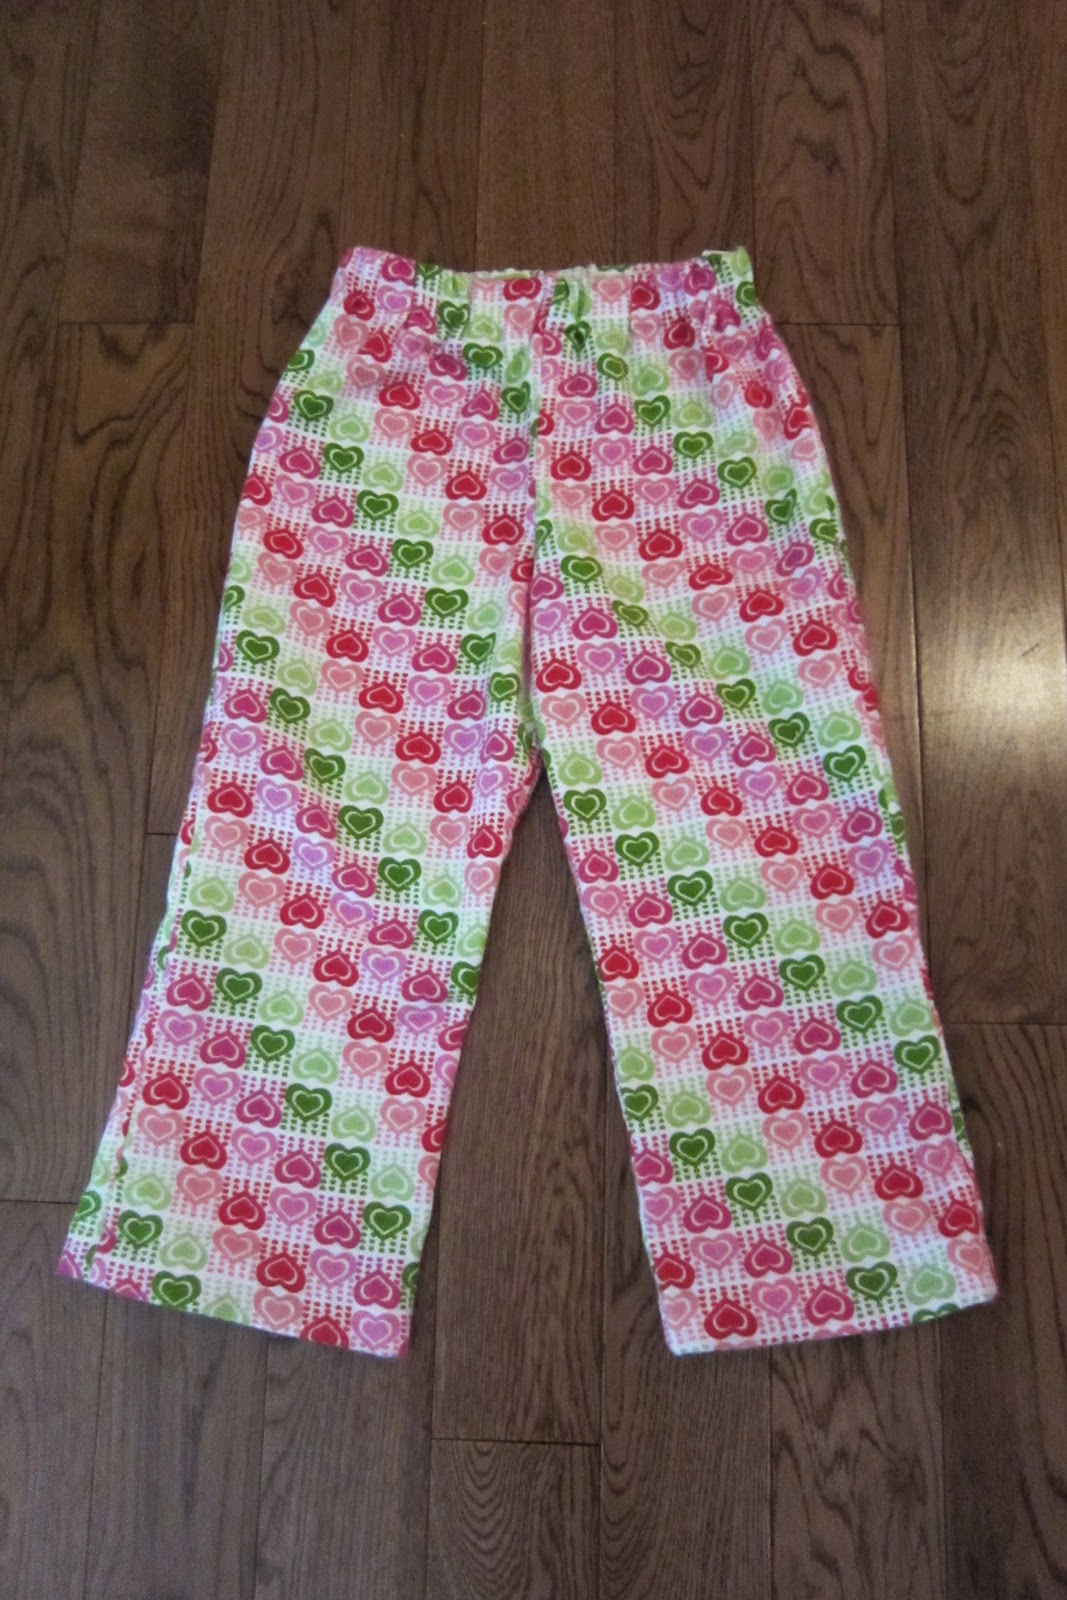 One Little Woman: Sewing class #4 and #5 - I made pants!!